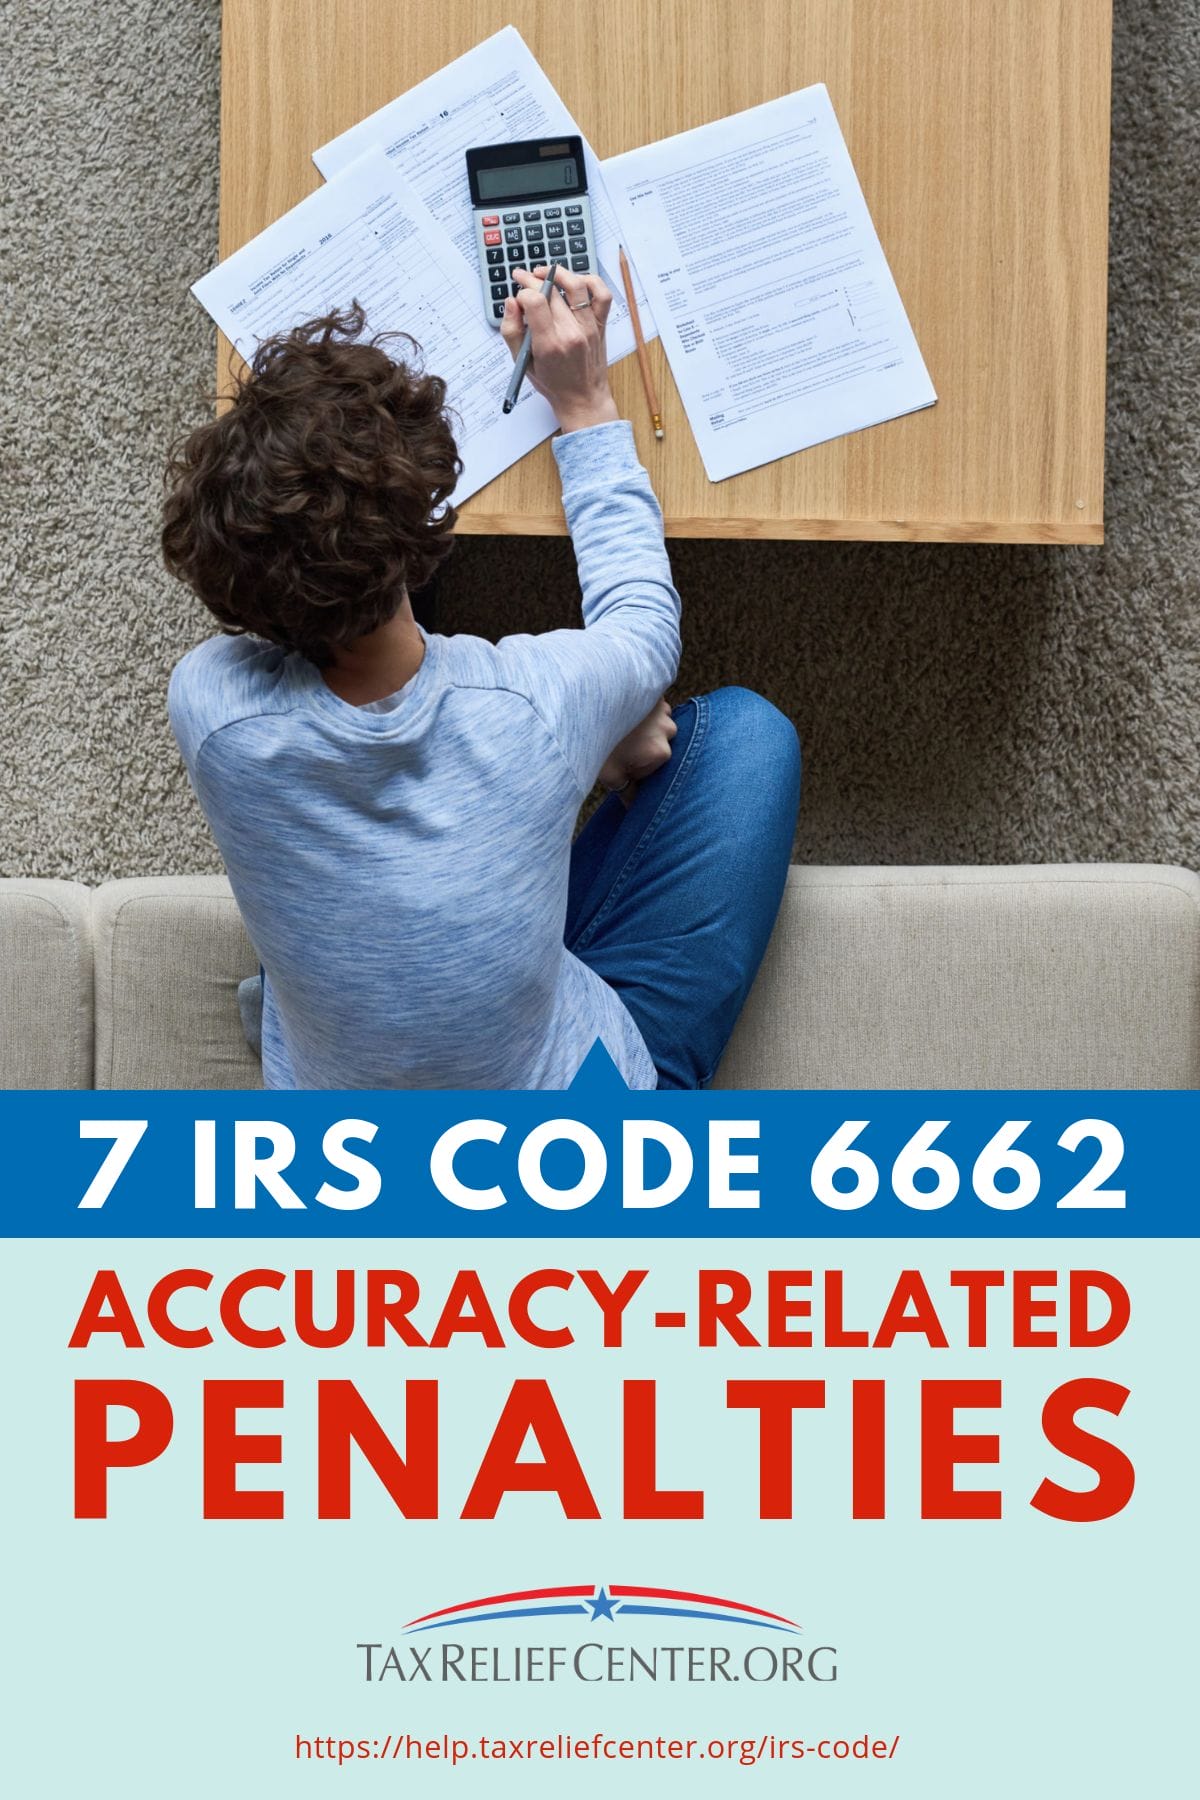 7 IRS Code 6662 Accuracy-Related Penalties https://help.taxreliefcenter.org/irs-code/